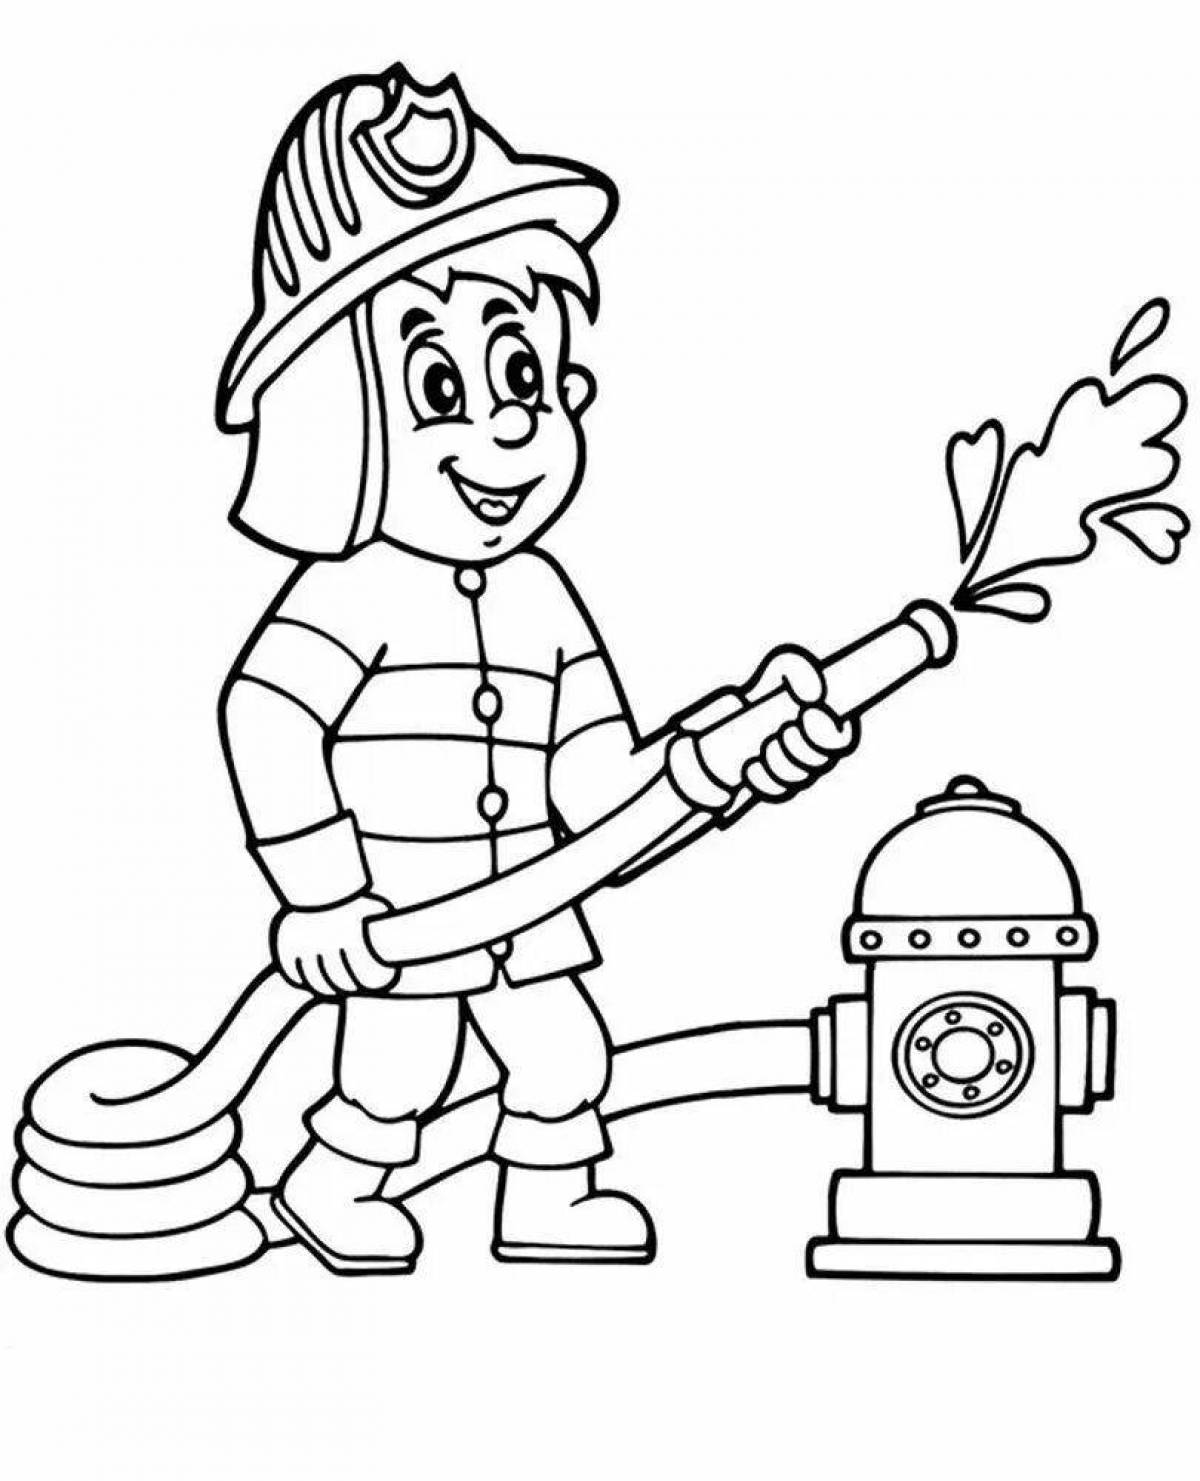 Cute kindergarten fire safety coloring page